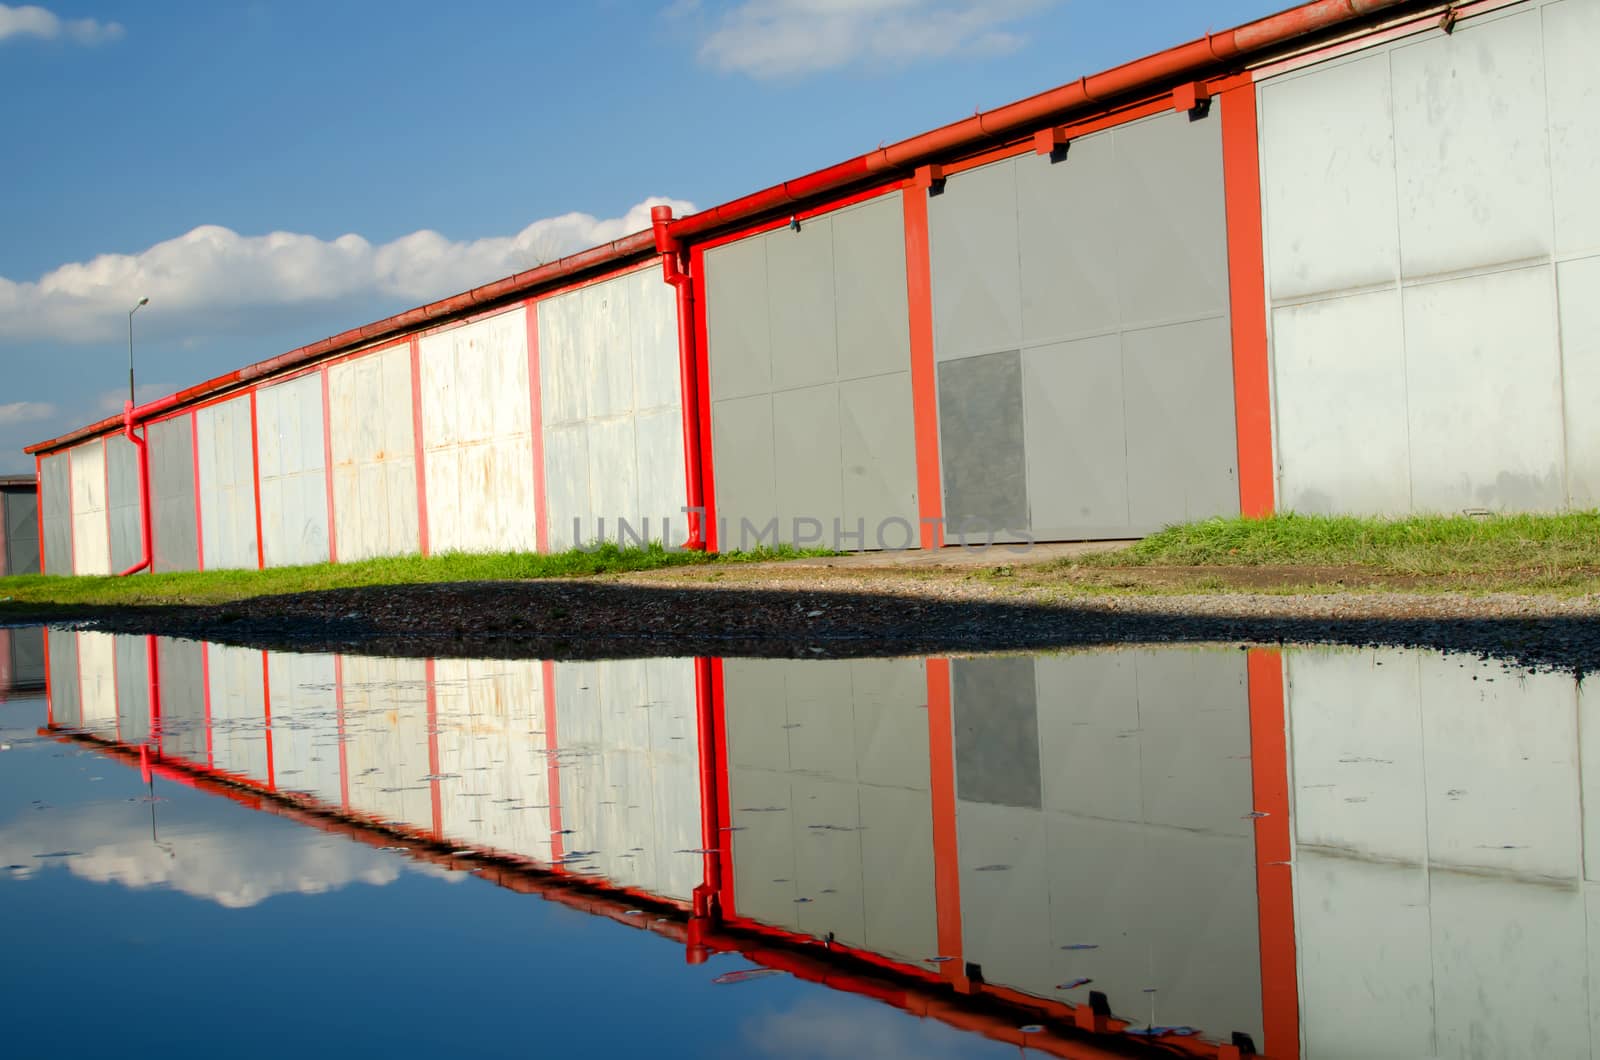 A lot of garages, puddle with reflection.